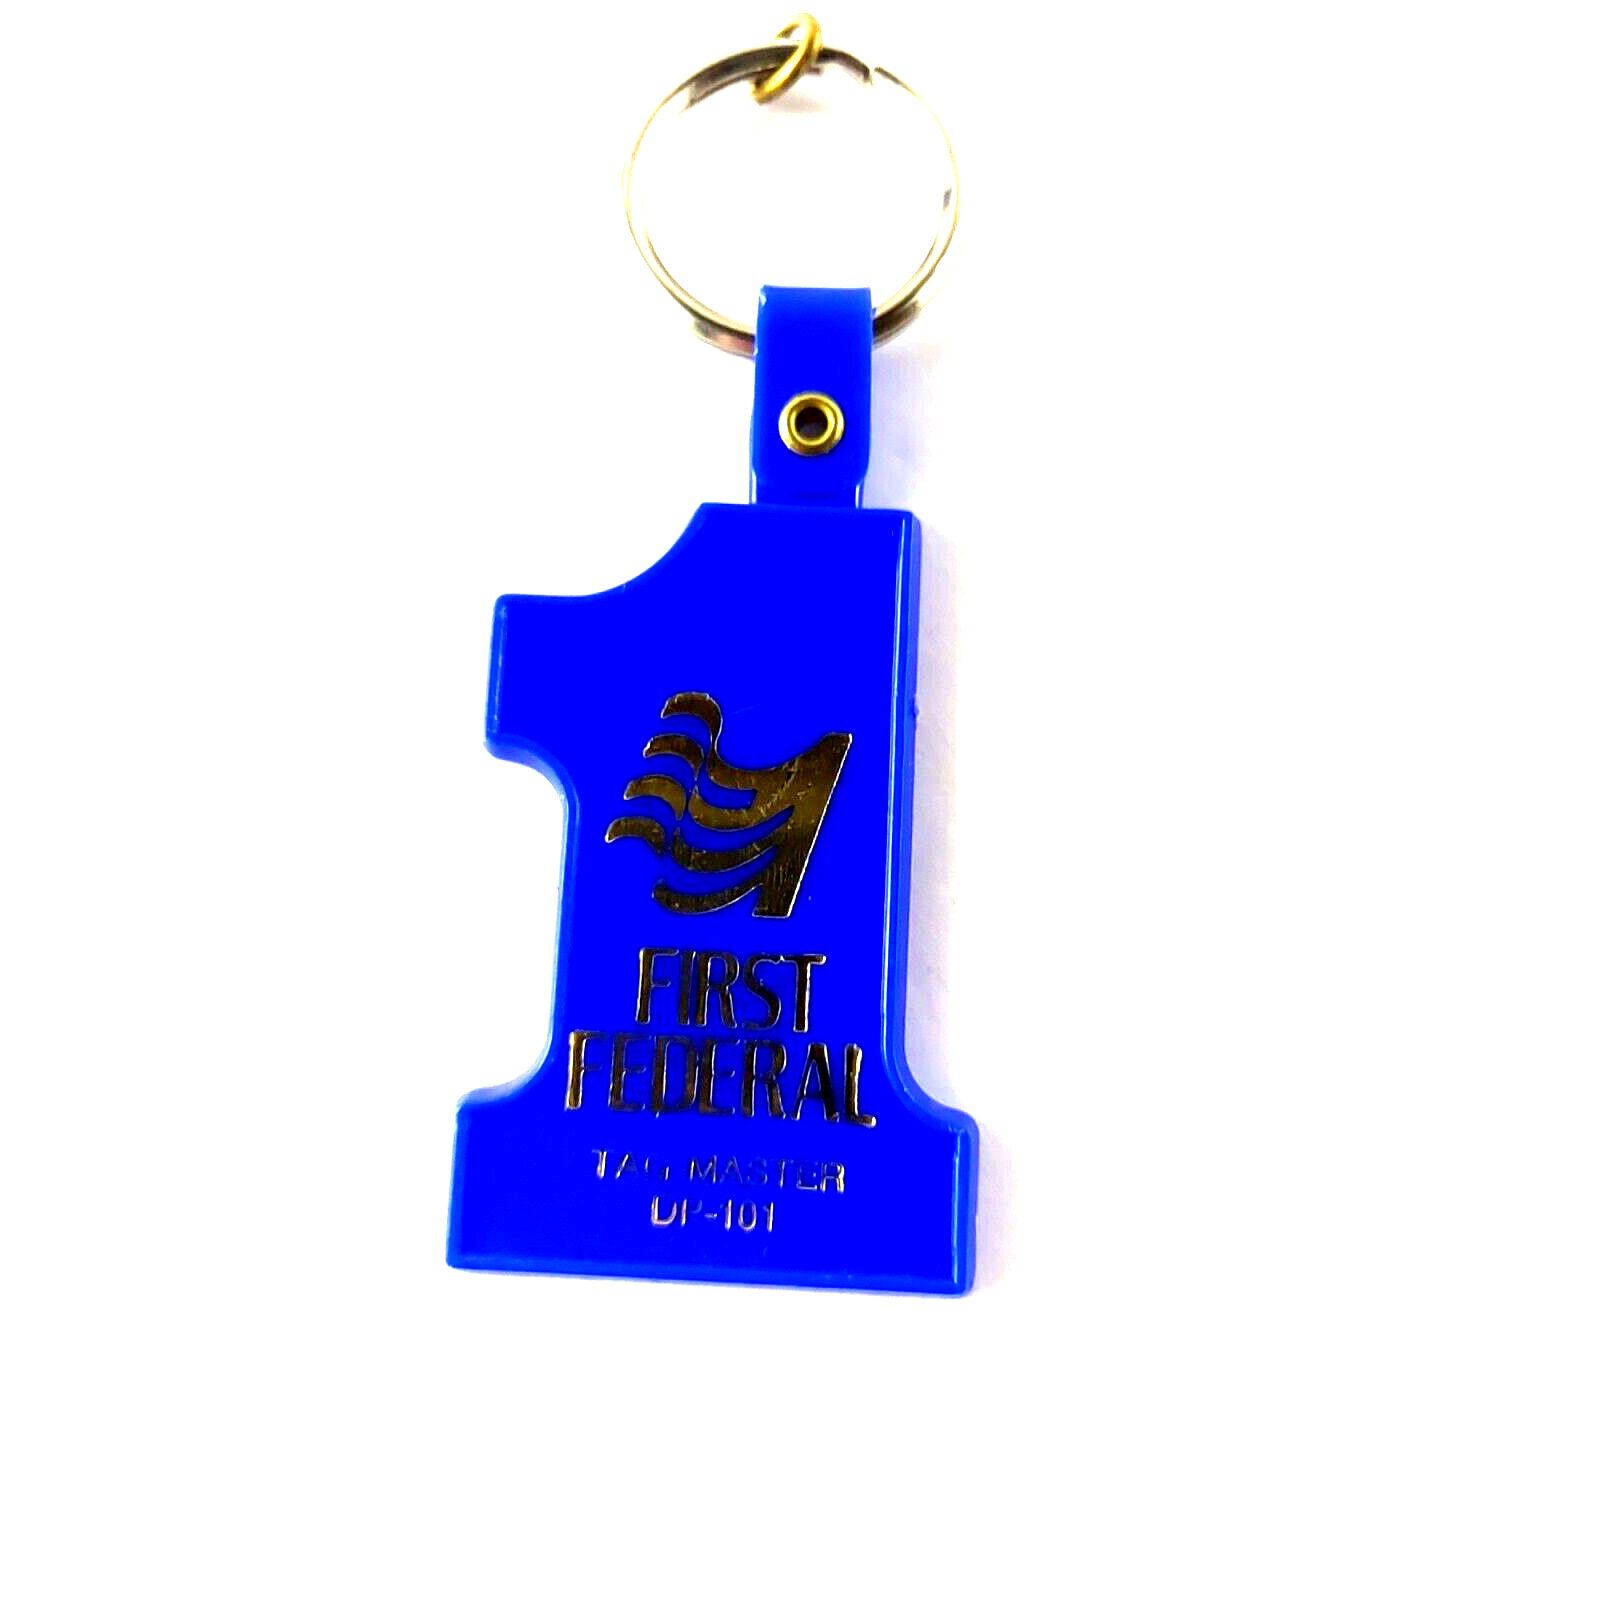 First Federal Tag Master DP 101 #1 Blue Keychain